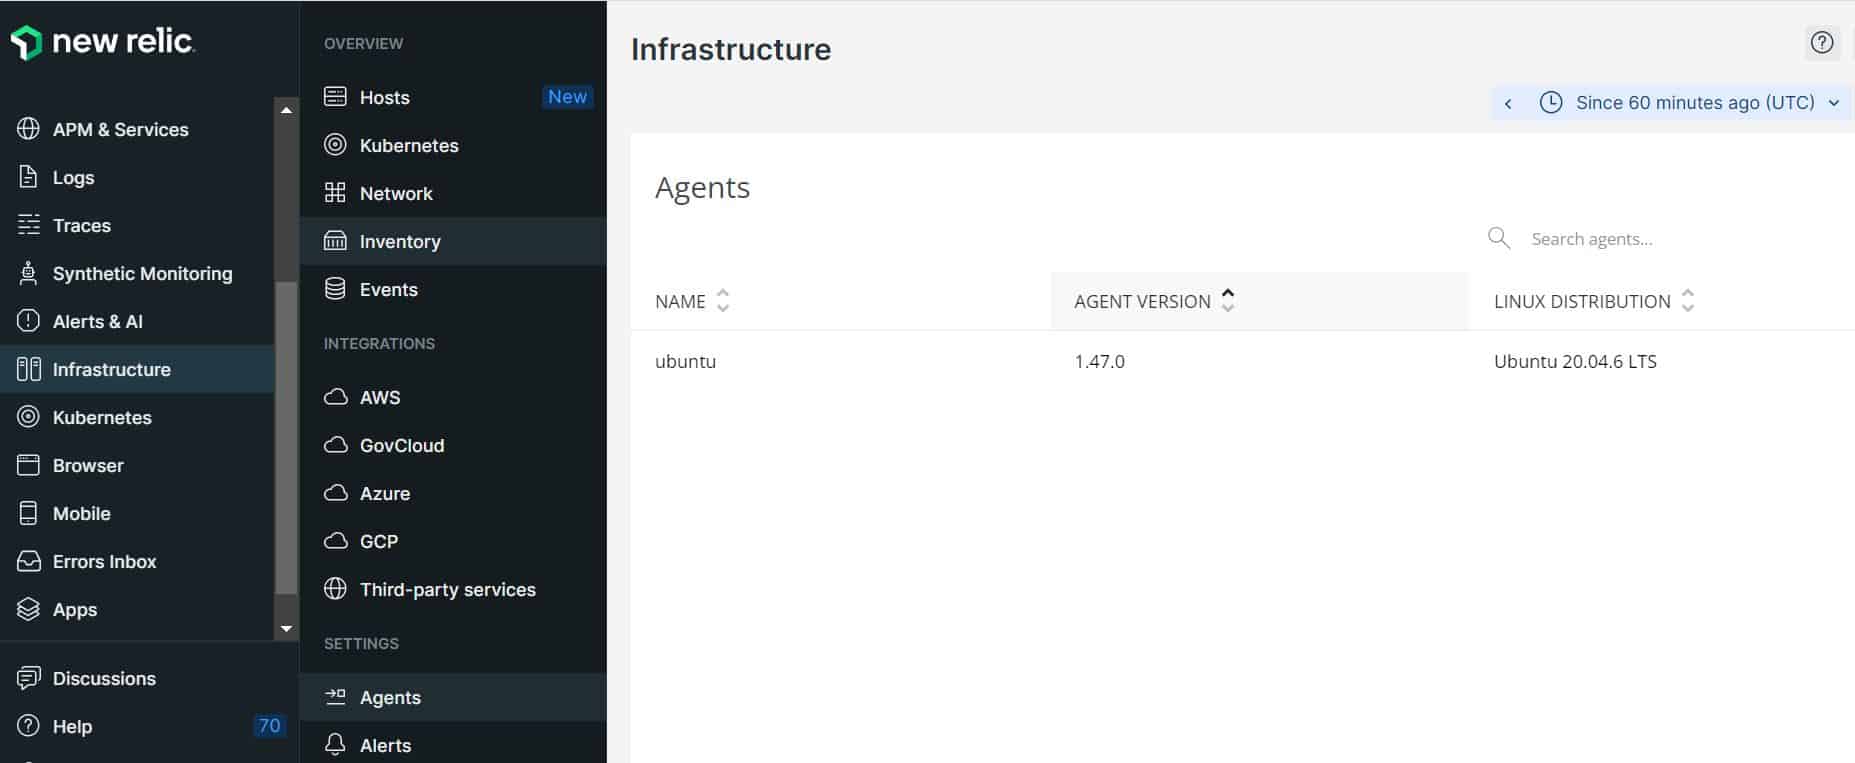 How to Install New Relic Infrastructure Agent on Ubuntu 20.04 LTS 2